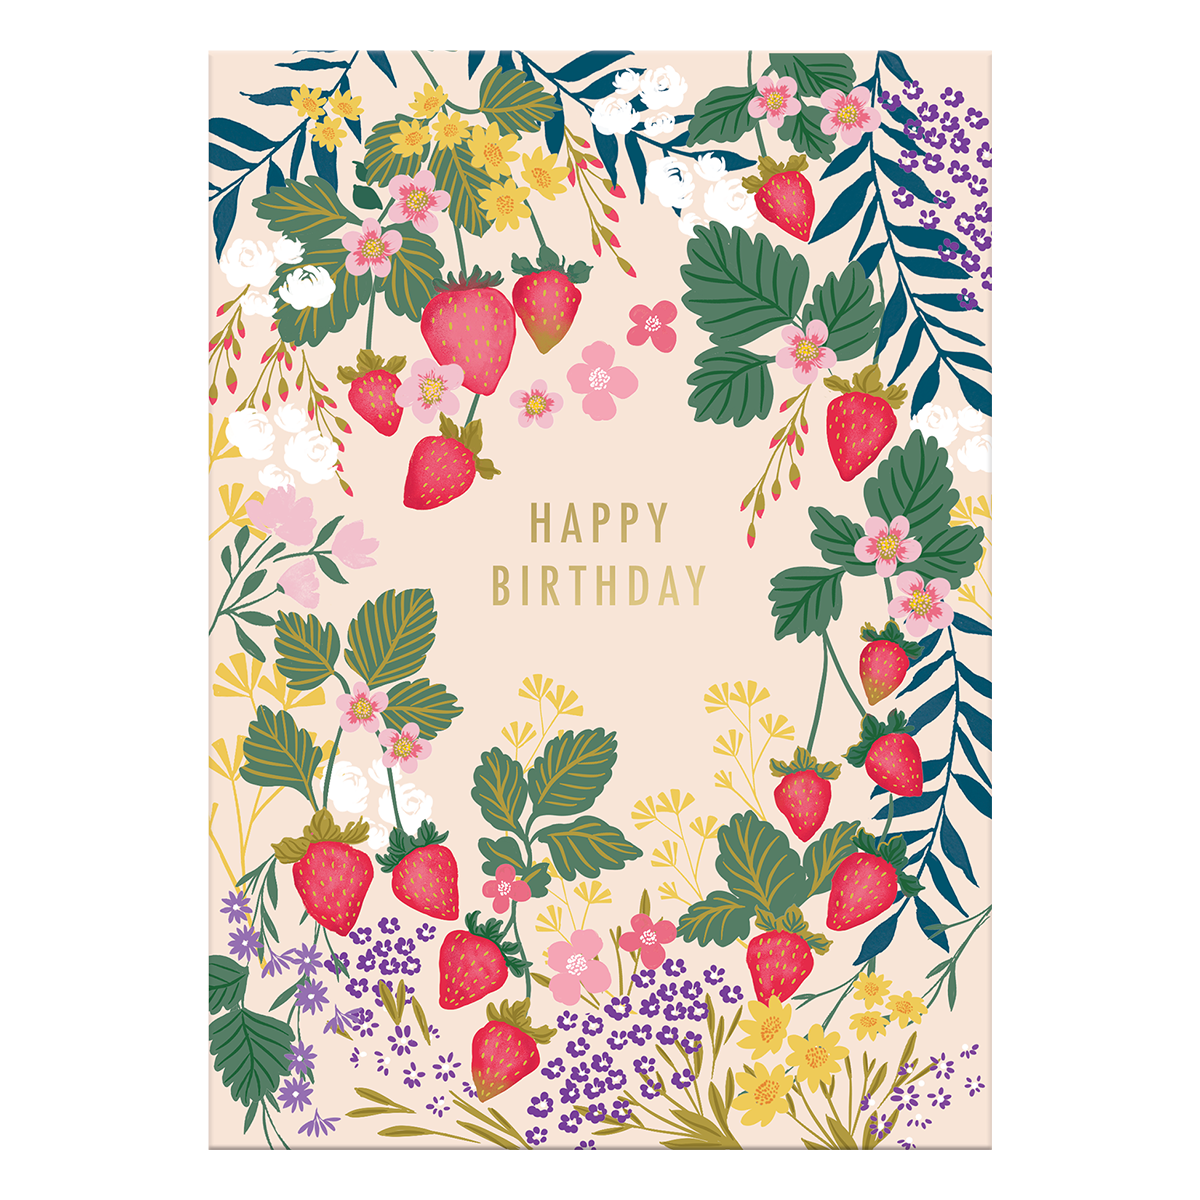 Strawberries Greeting Card Product